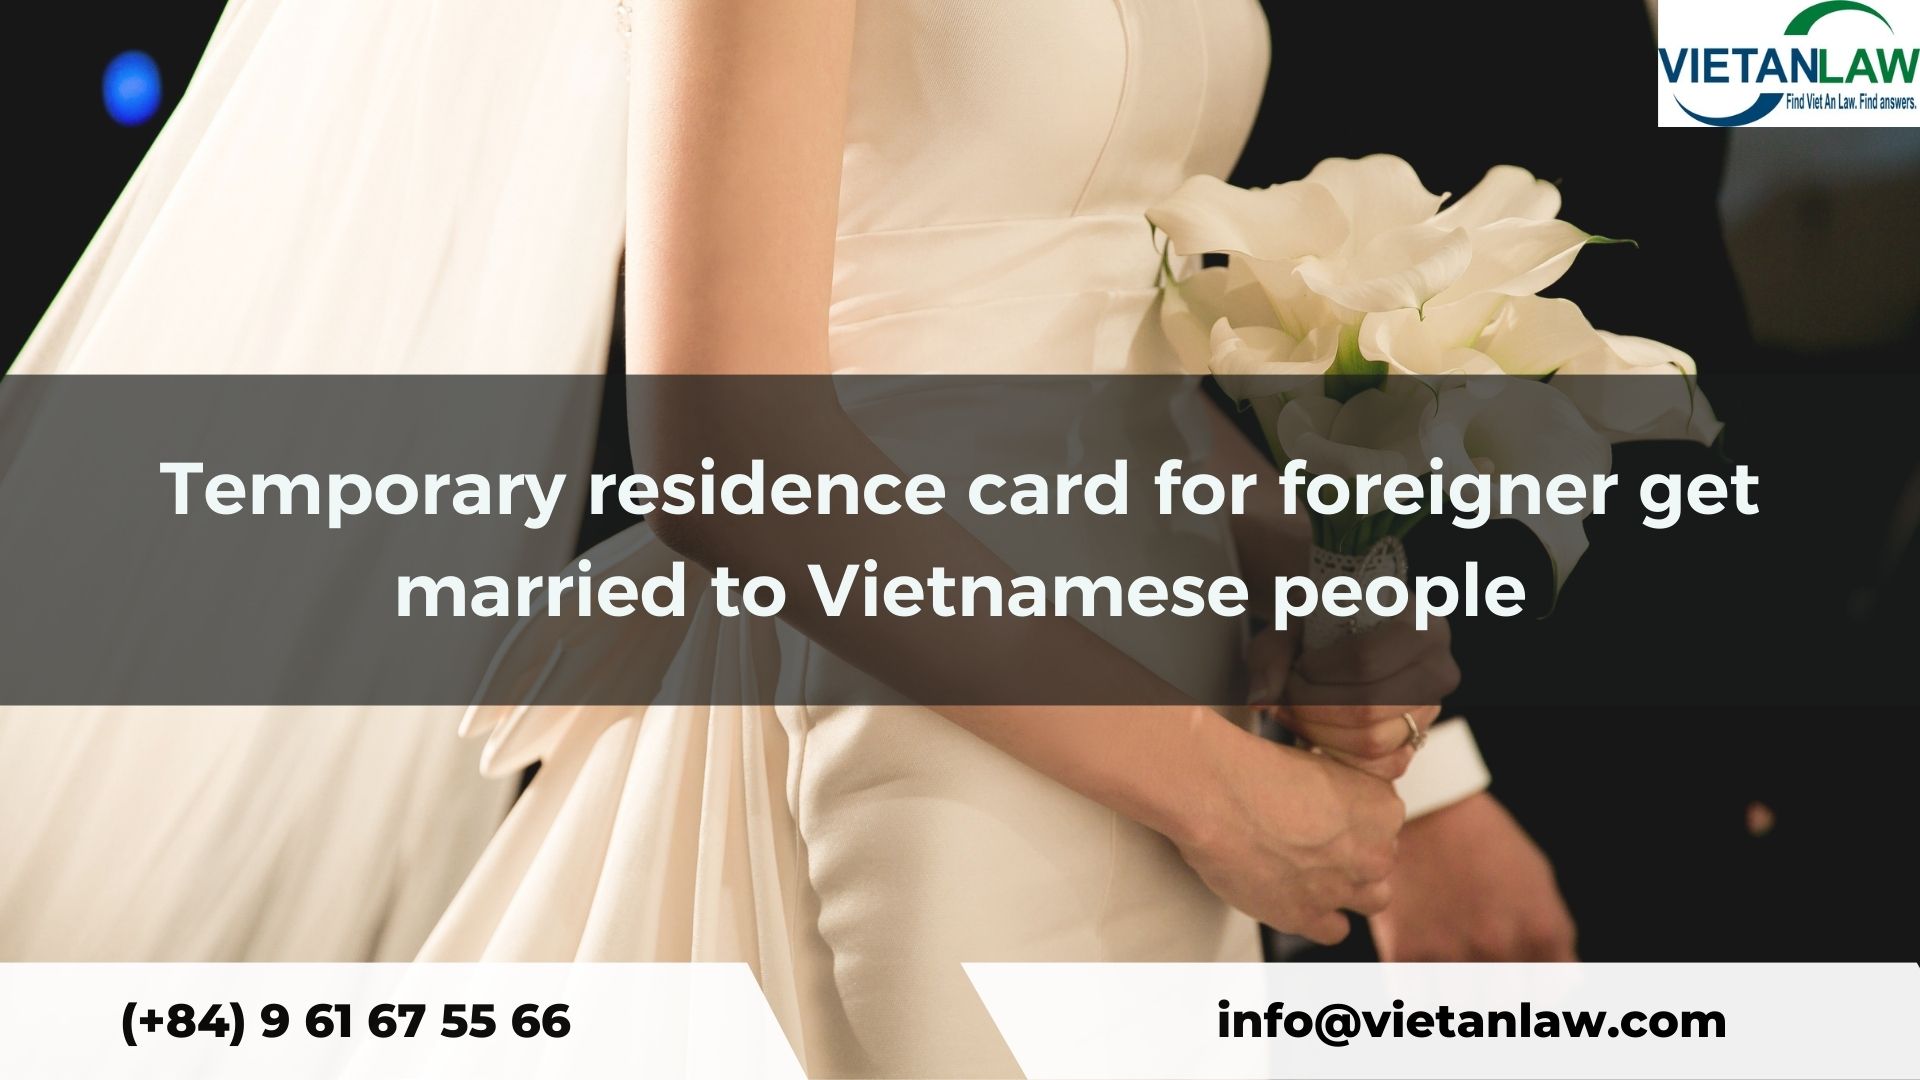 Temporary residence card for foreigner get married to Vietnamese people